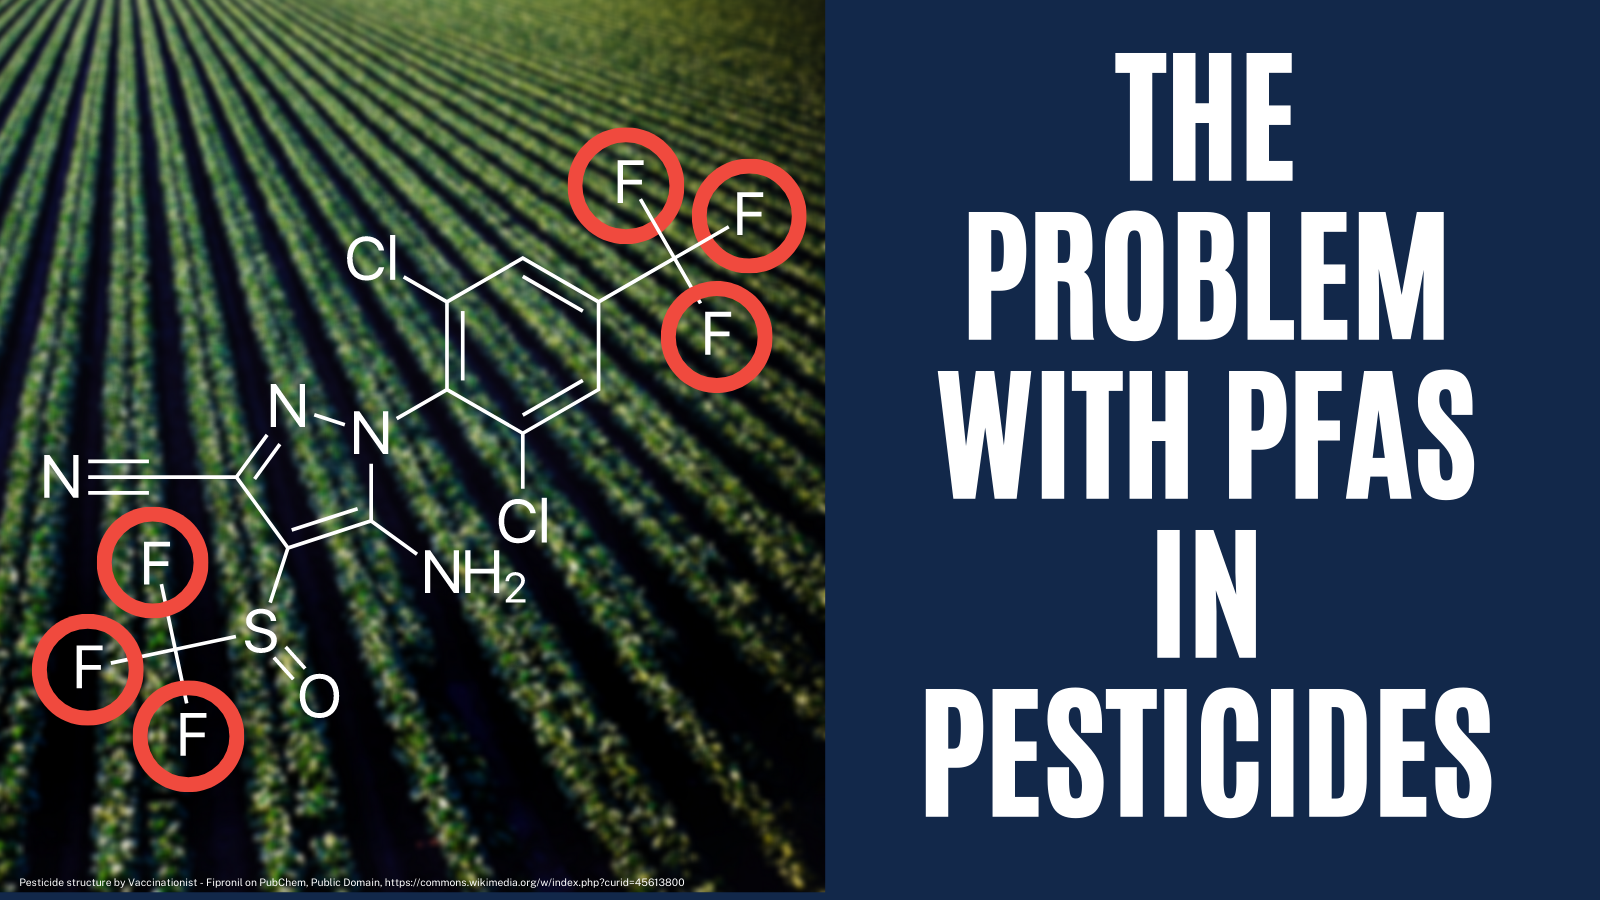 Pesticides, already products of concern for the environment, can also contain PFAS, also products of great concern. With the known environmental impacts of PFAS, alongside their alarming persistence, should this be allowed to continue?